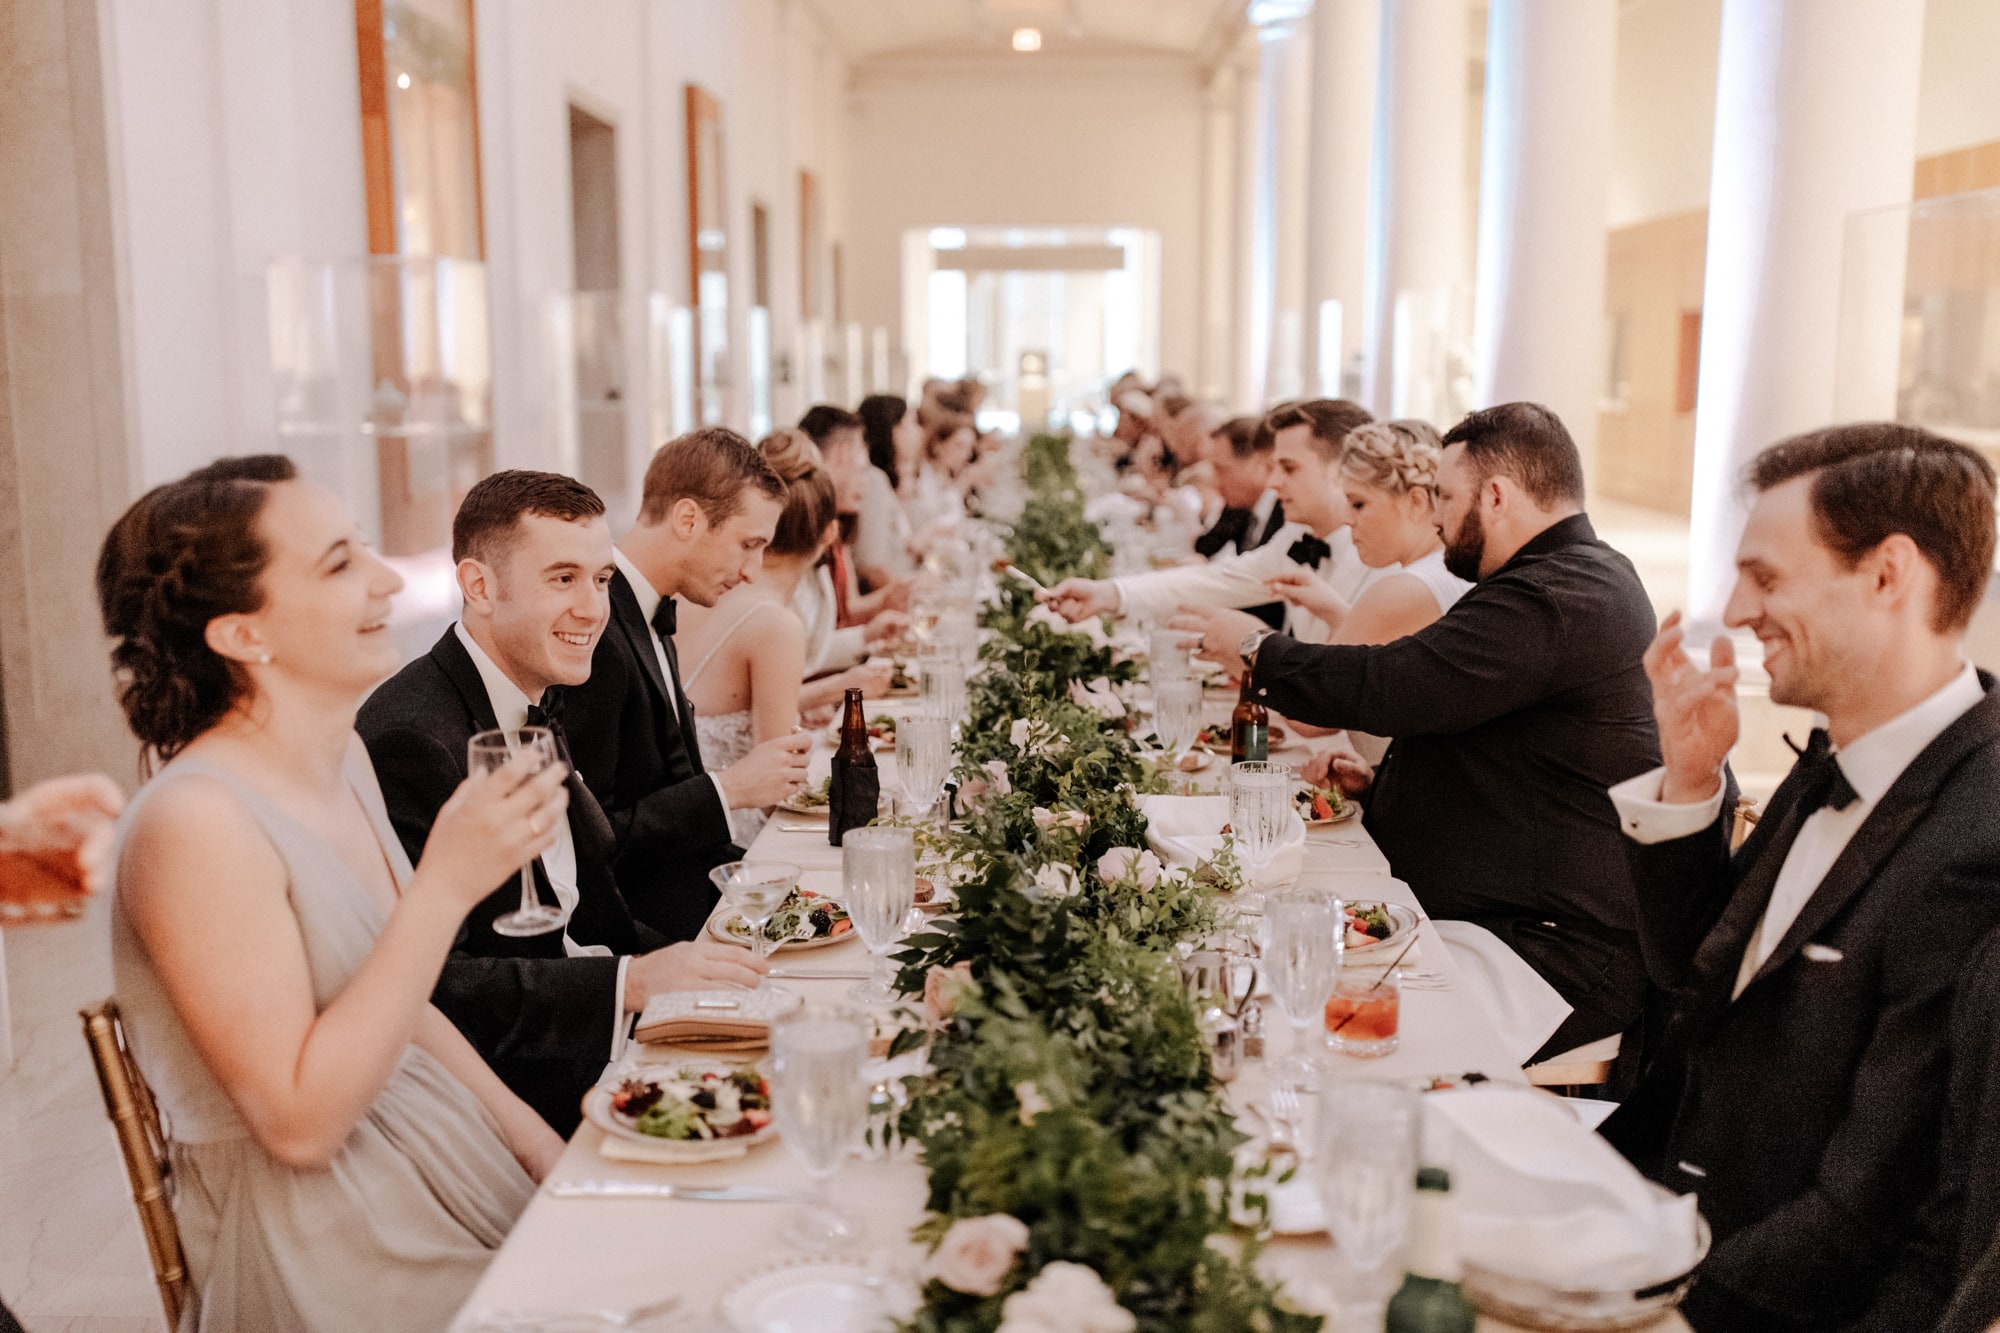 Well-dressed guests sit at a long table during a wedding reception dinner inside the Minneapolis Institute of Art.